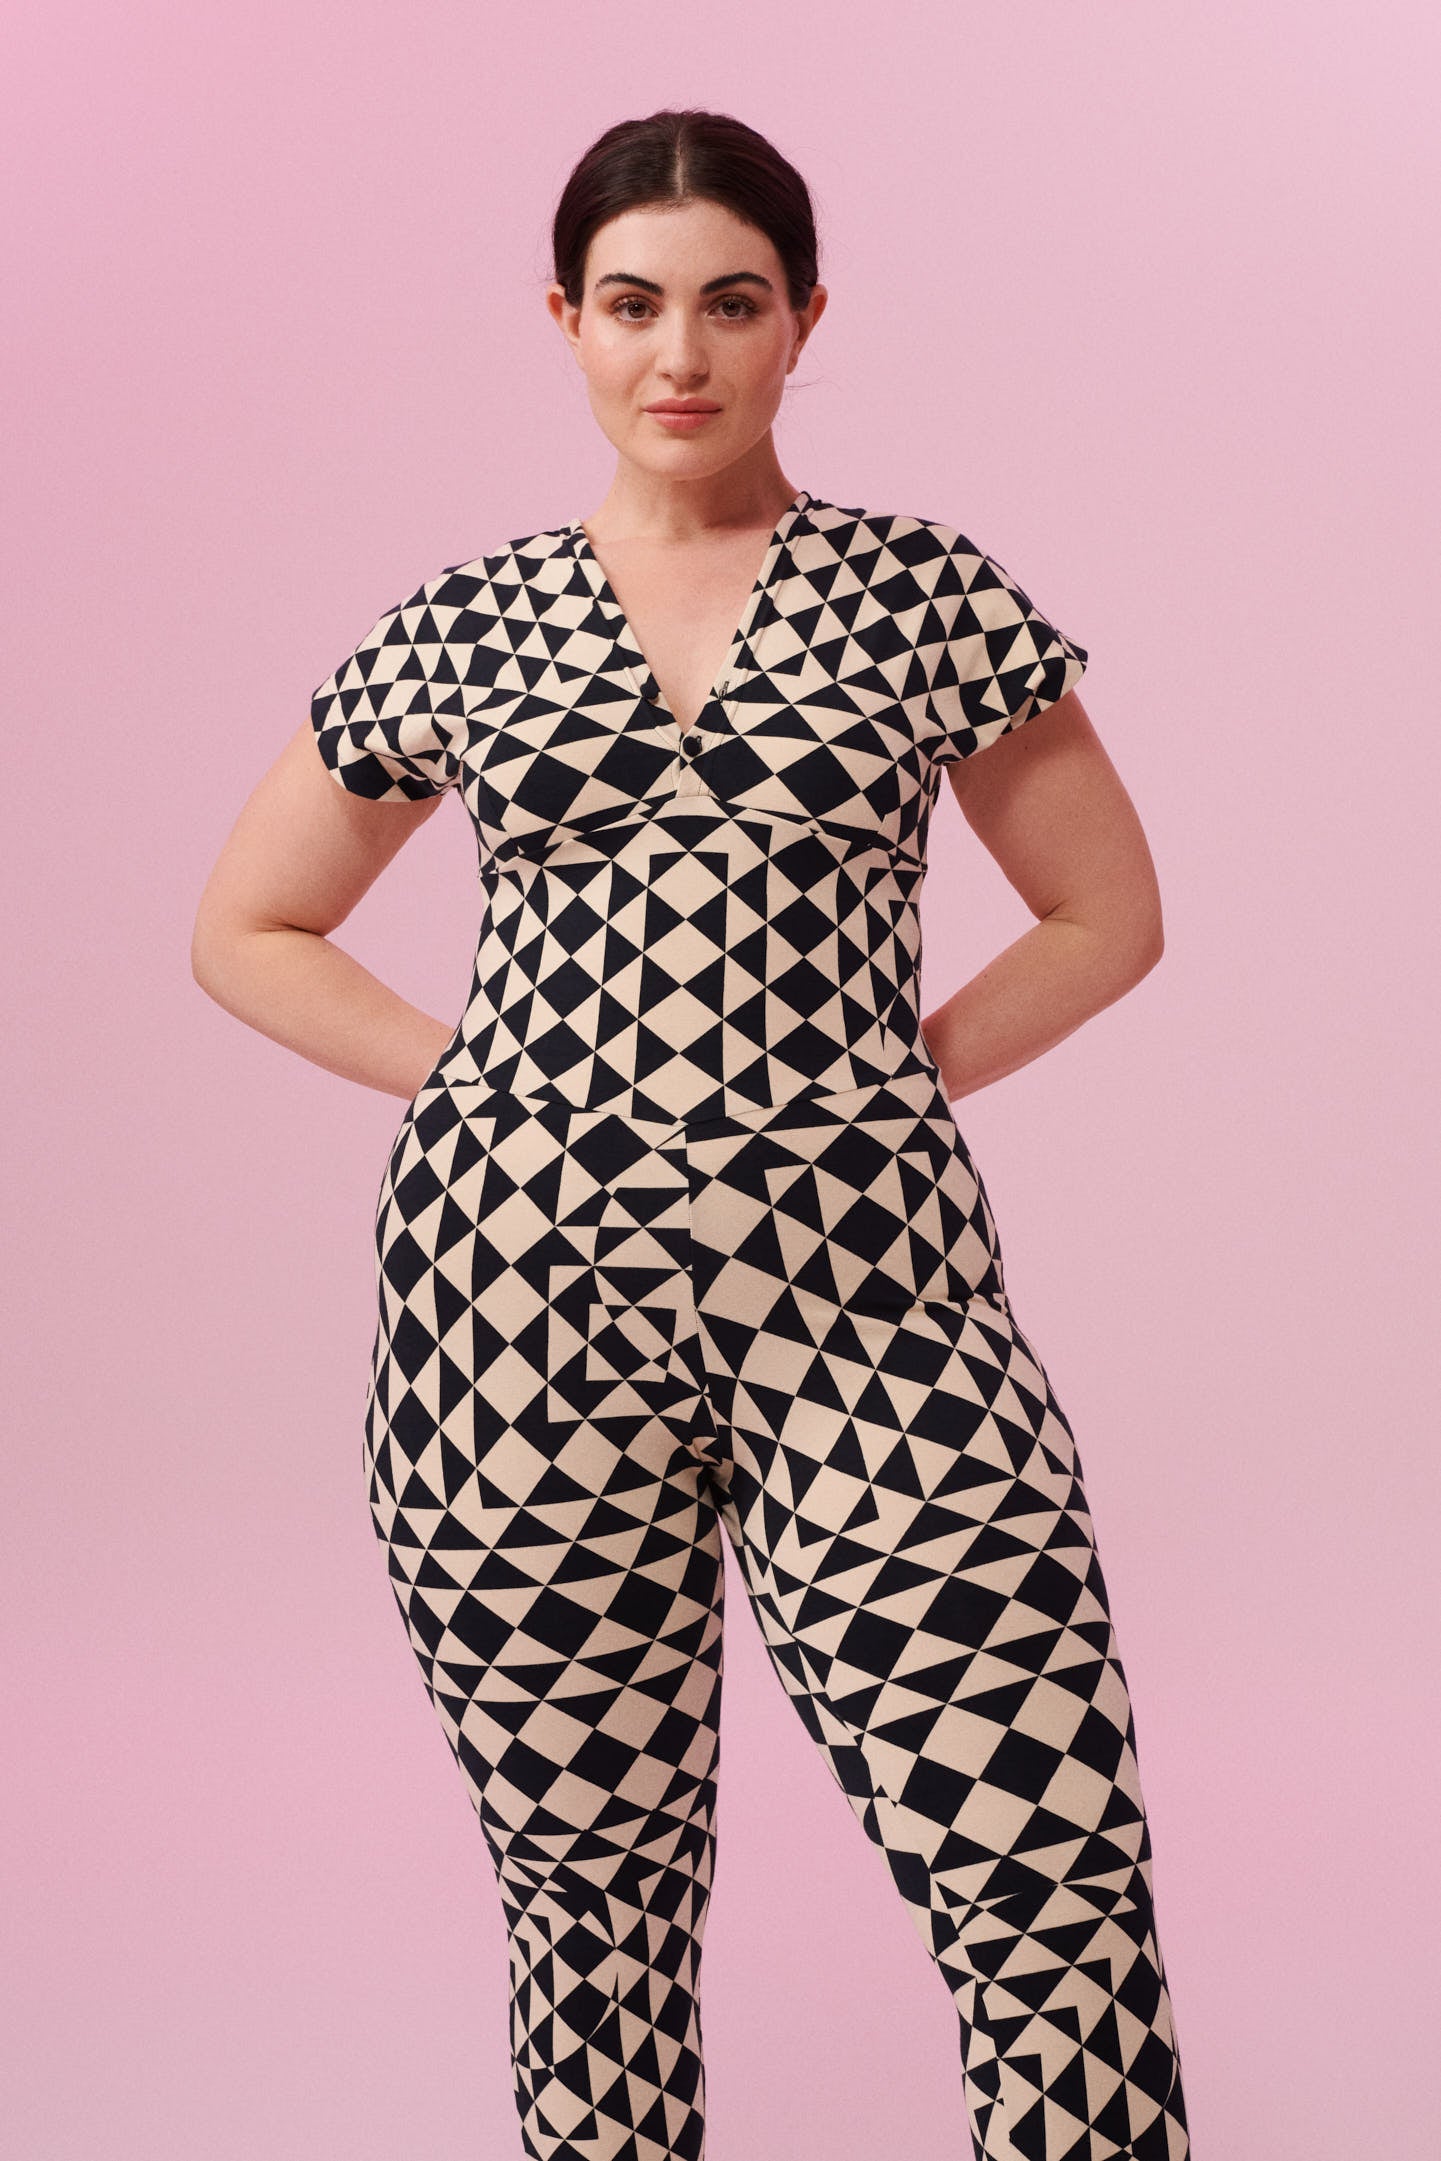 Dark haired model with hair tied back wearing a Geometric black and white tri-print organic cotton jumpsuit